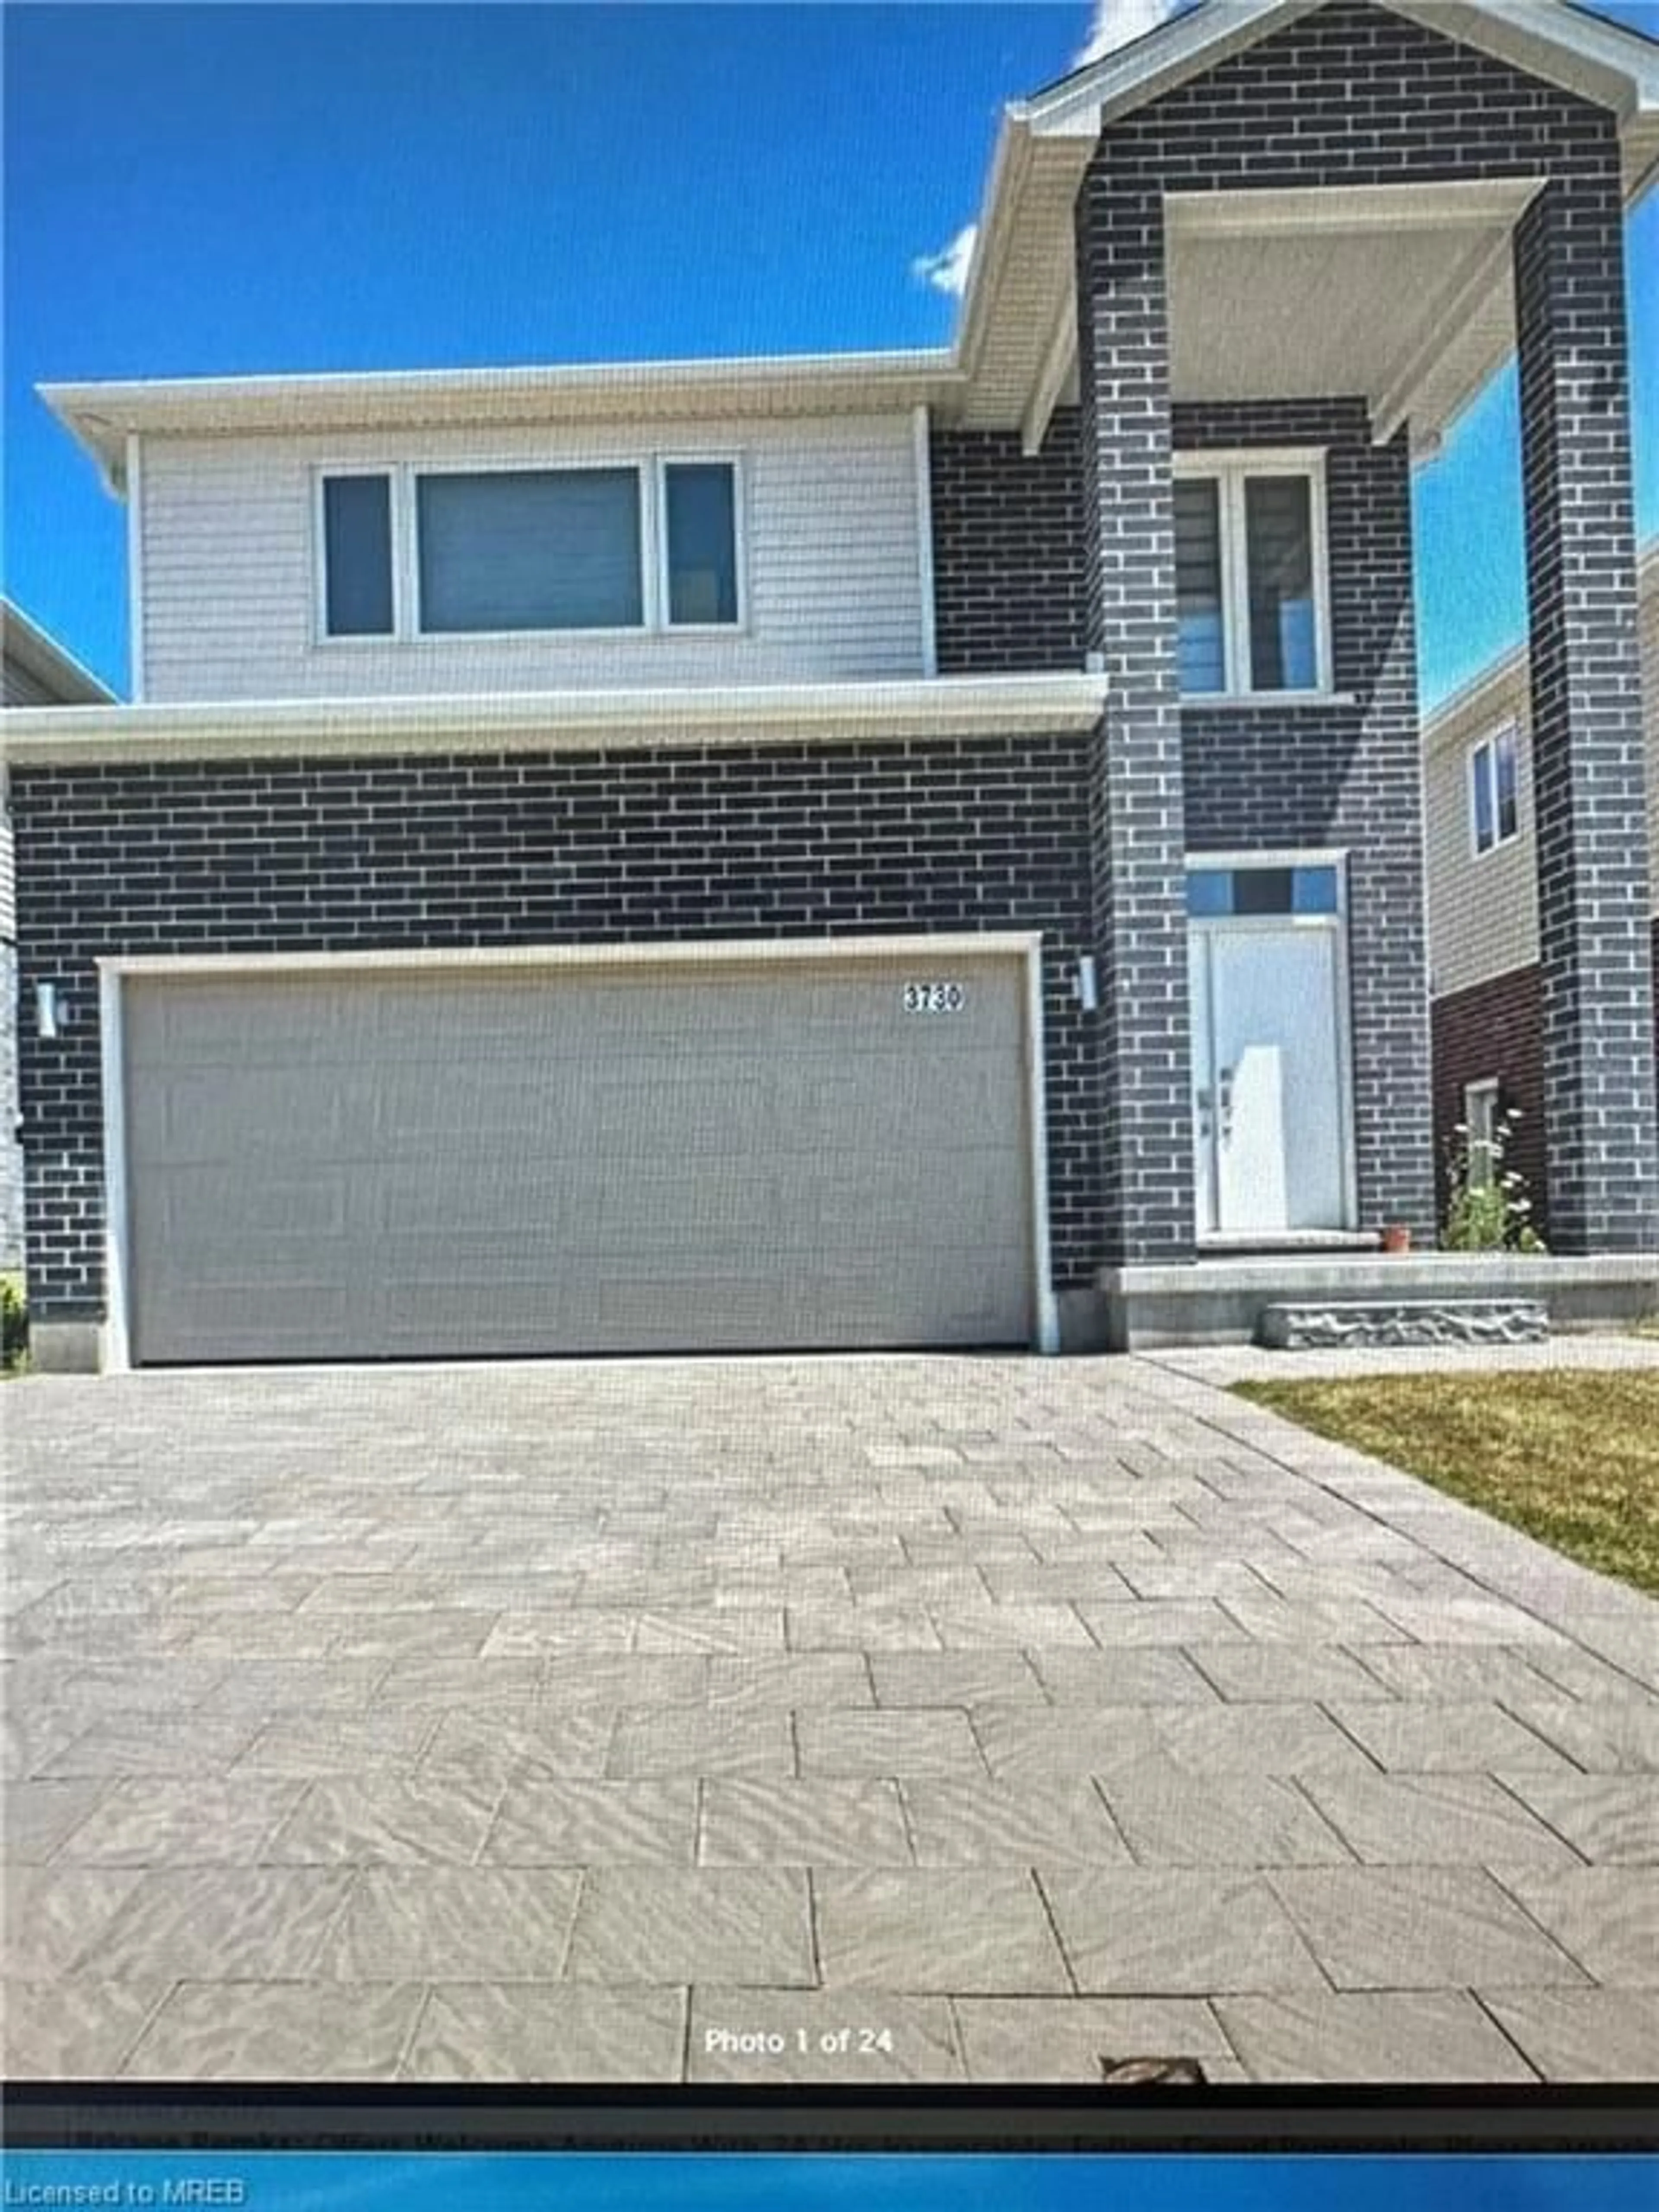 Home with brick exterior material for 3730 Somerston Cres, London Ontario N6L 0G4